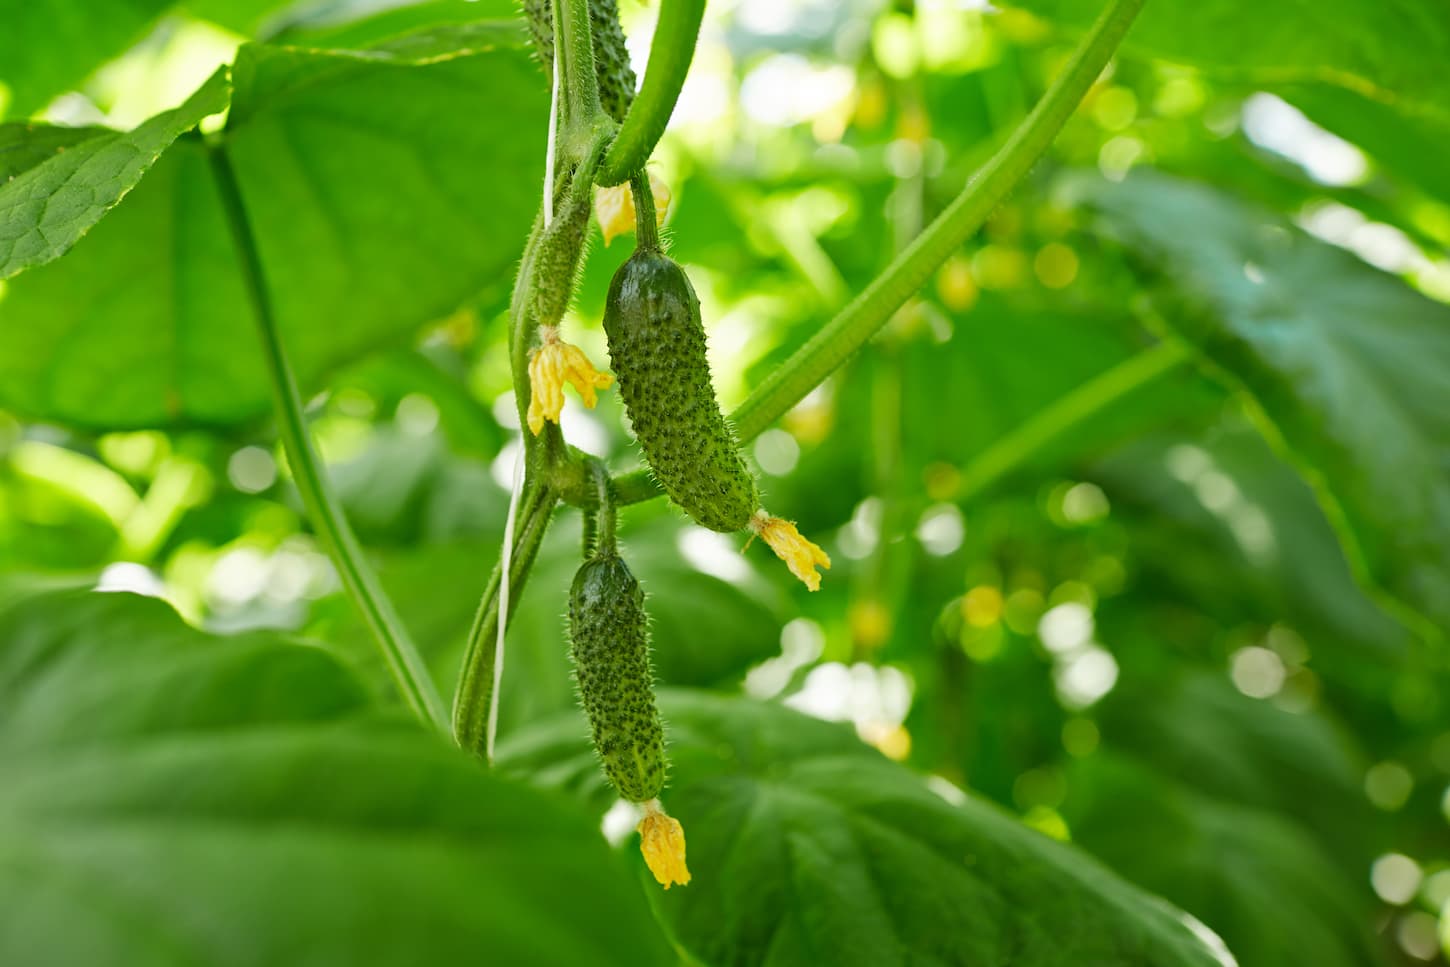 An image of small cucumbers growing on thin branches among green foliage on a hot summer day.